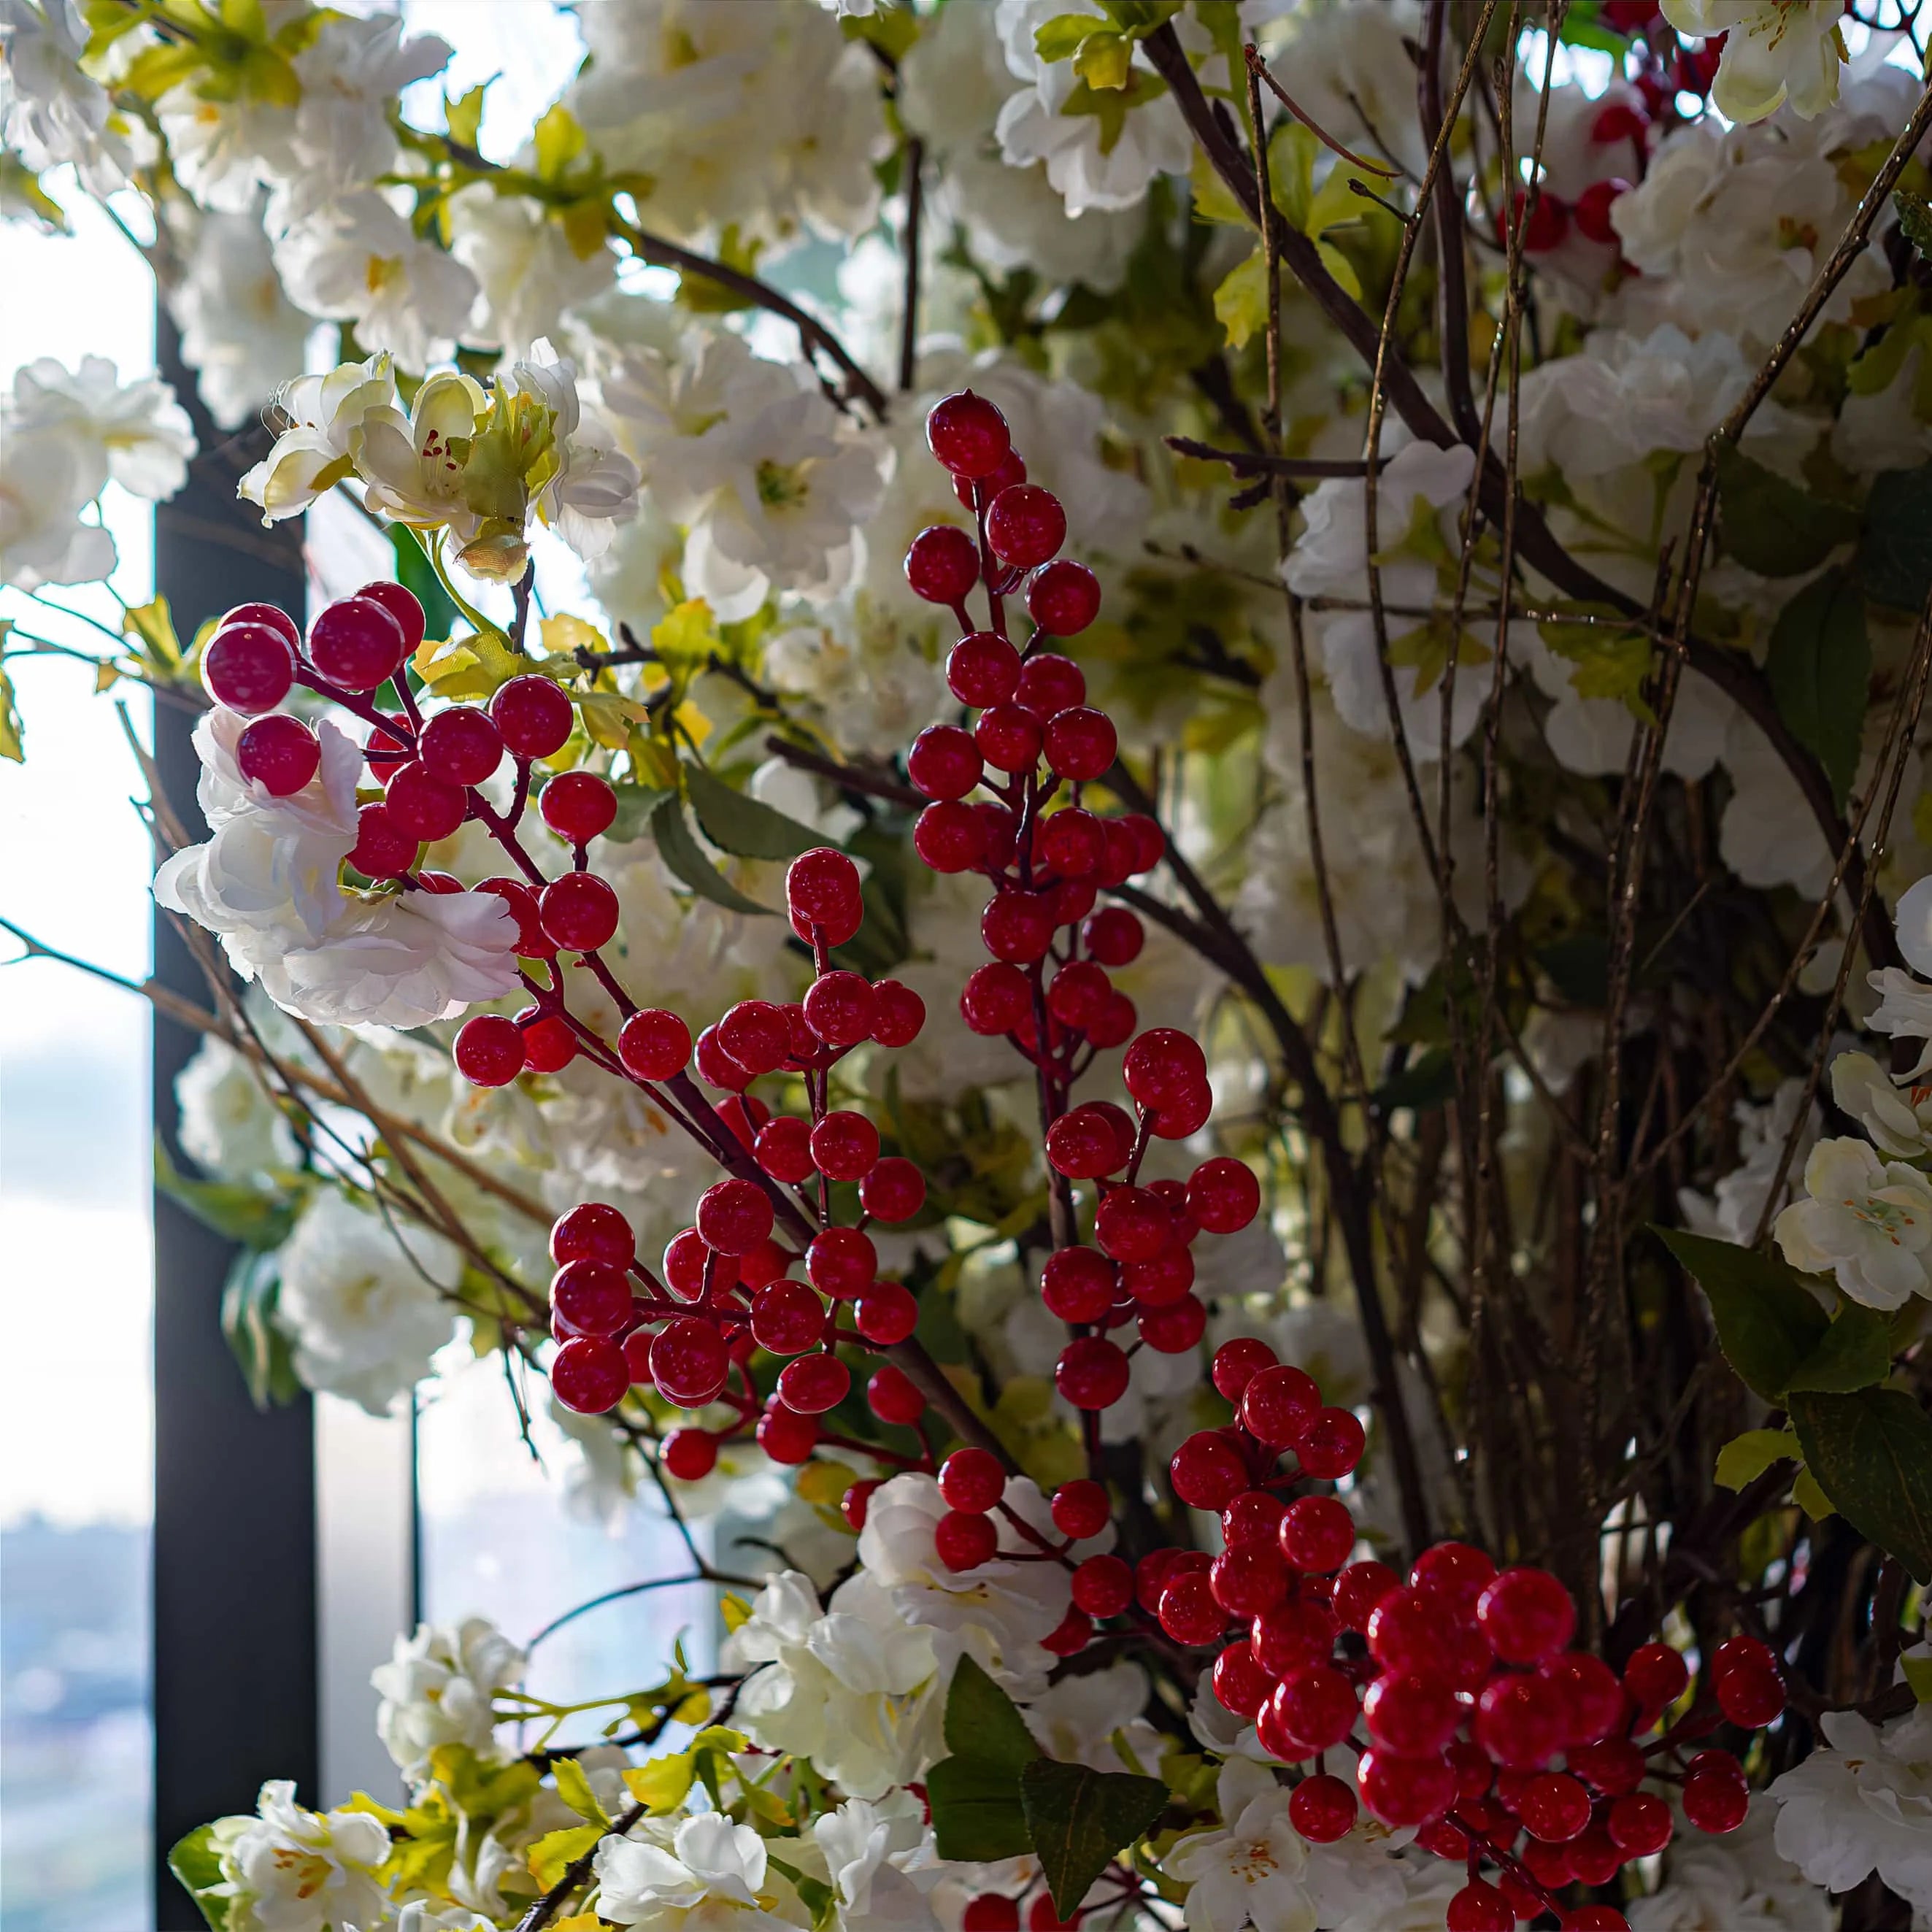 A vibrant spray of cherry red berries stands out among the white flowers and greenery in this Christmas floral arrangement for the STK Steakhouse in London, designed, created, and installed by event florist Amaranté London.